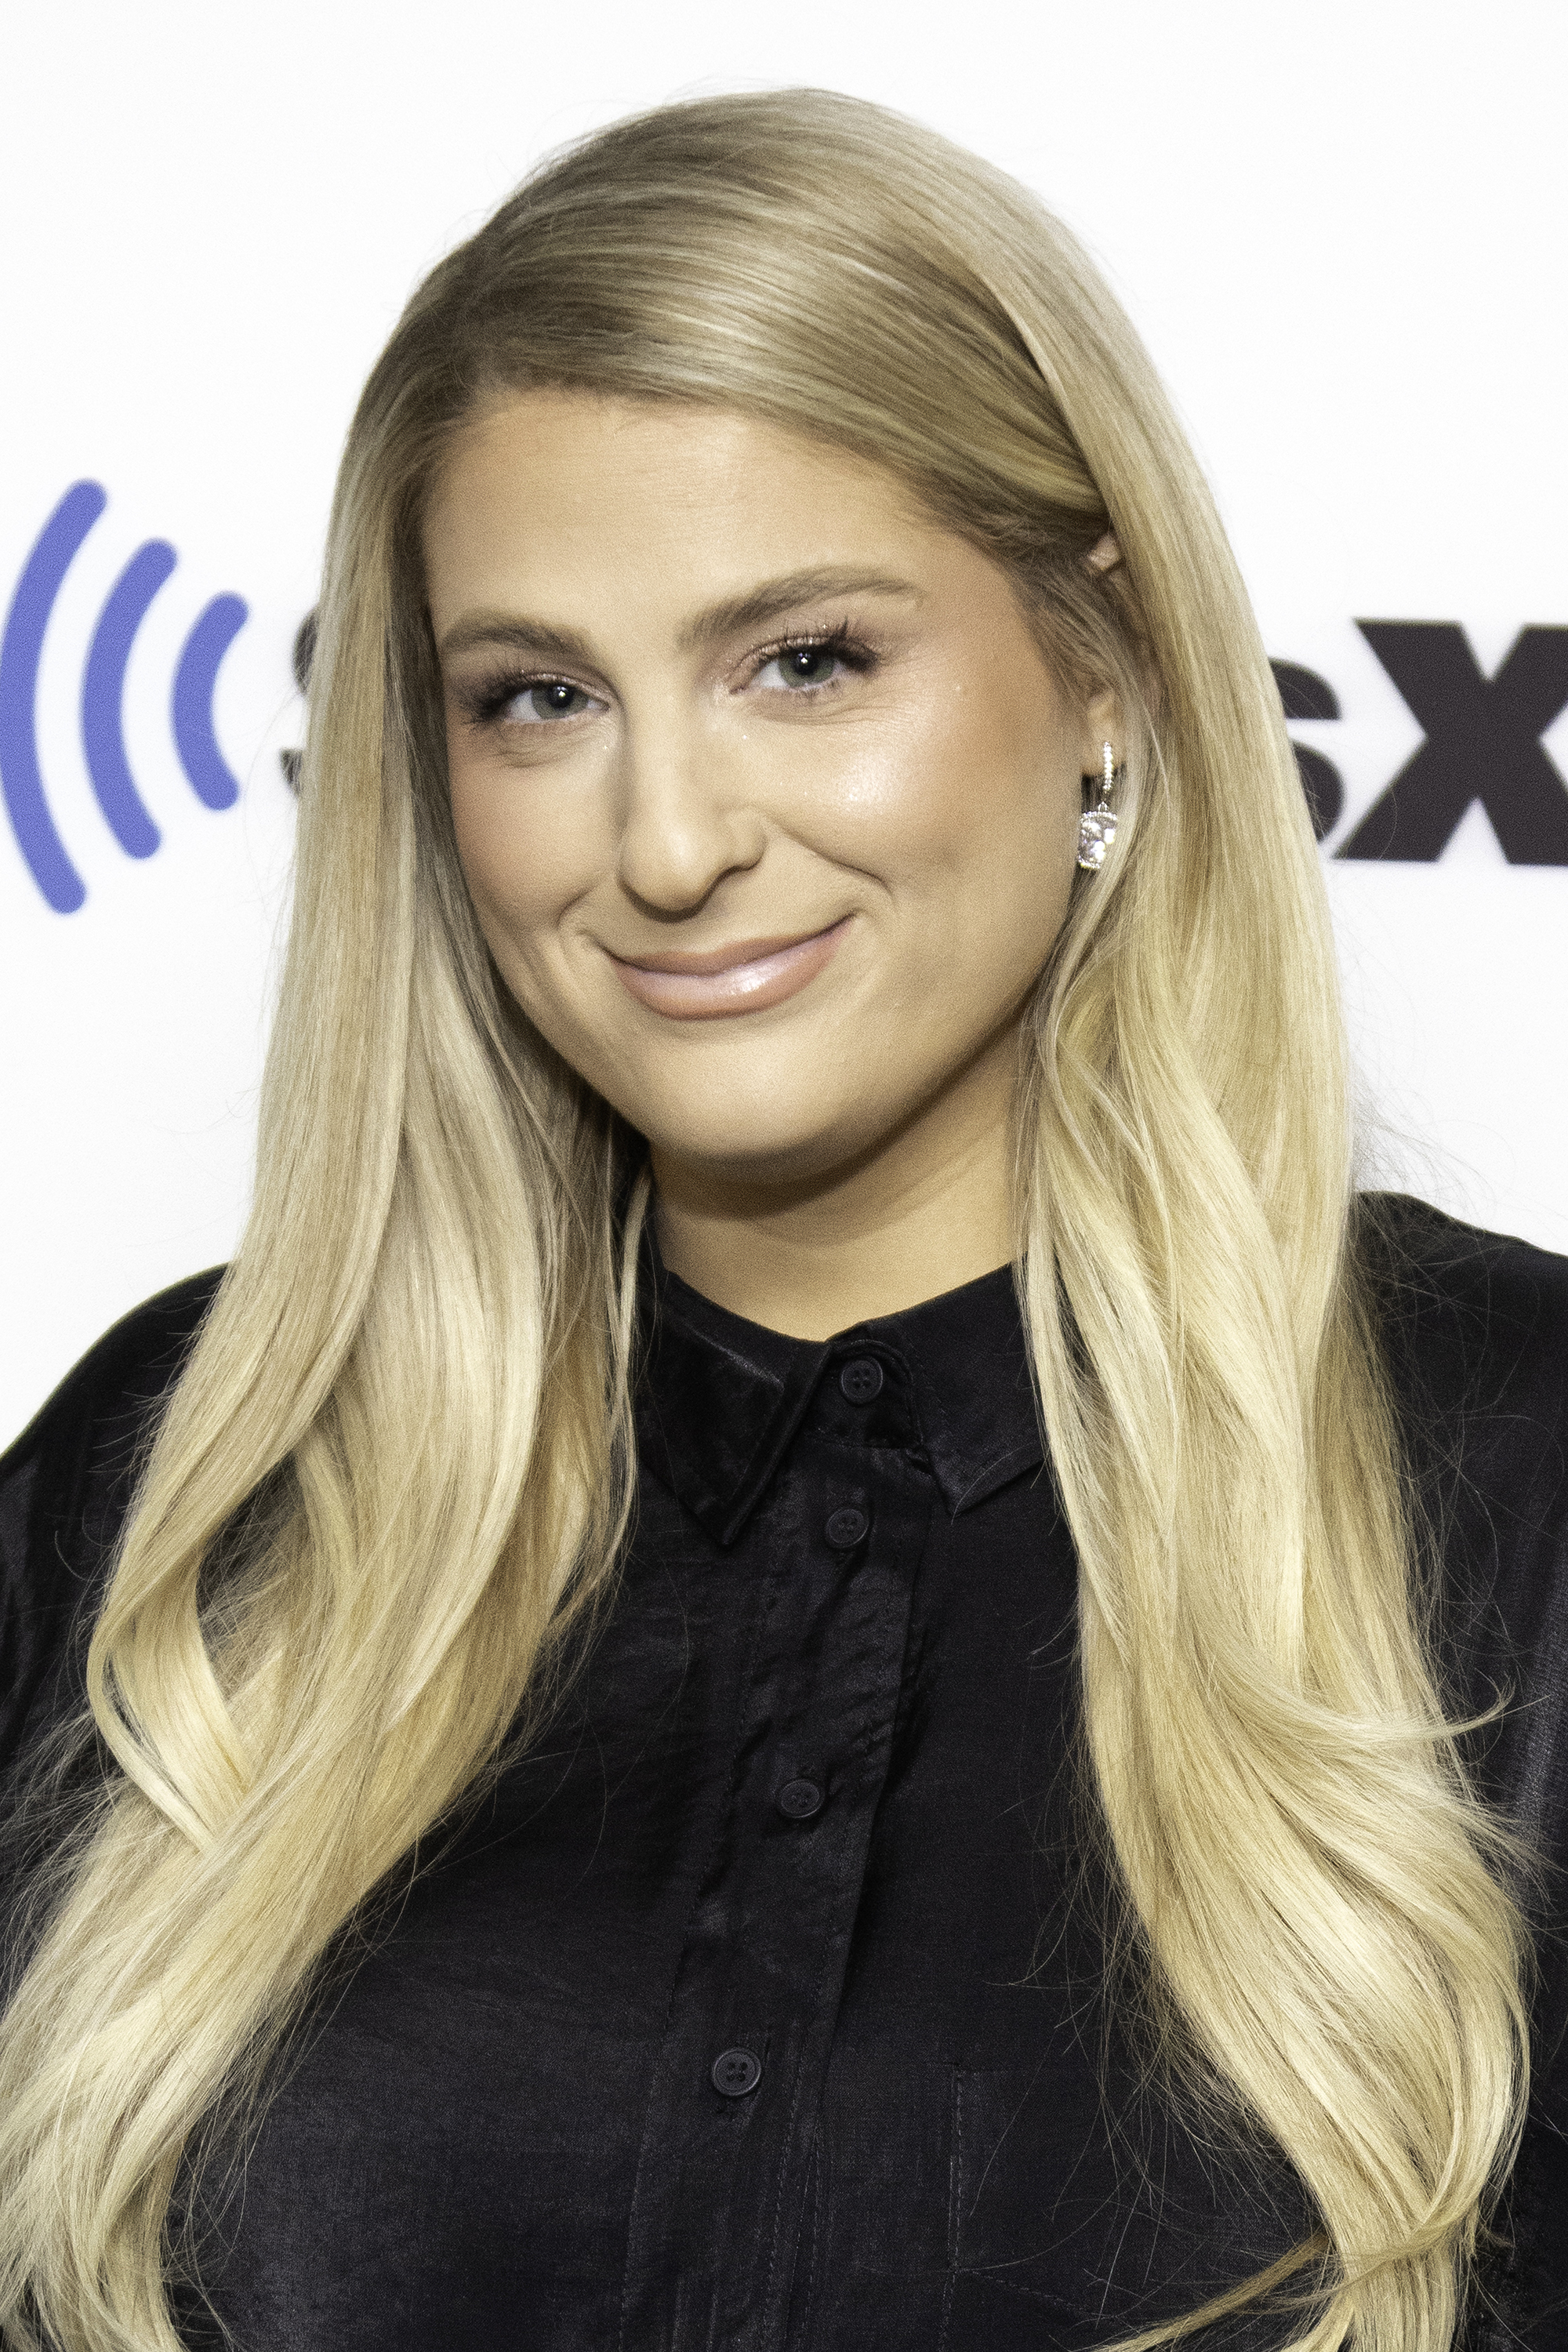 Meghan Trainor Felt 'Unsexy' After Welcoming Baby: 'I Have to Learn to  Love' Body Again